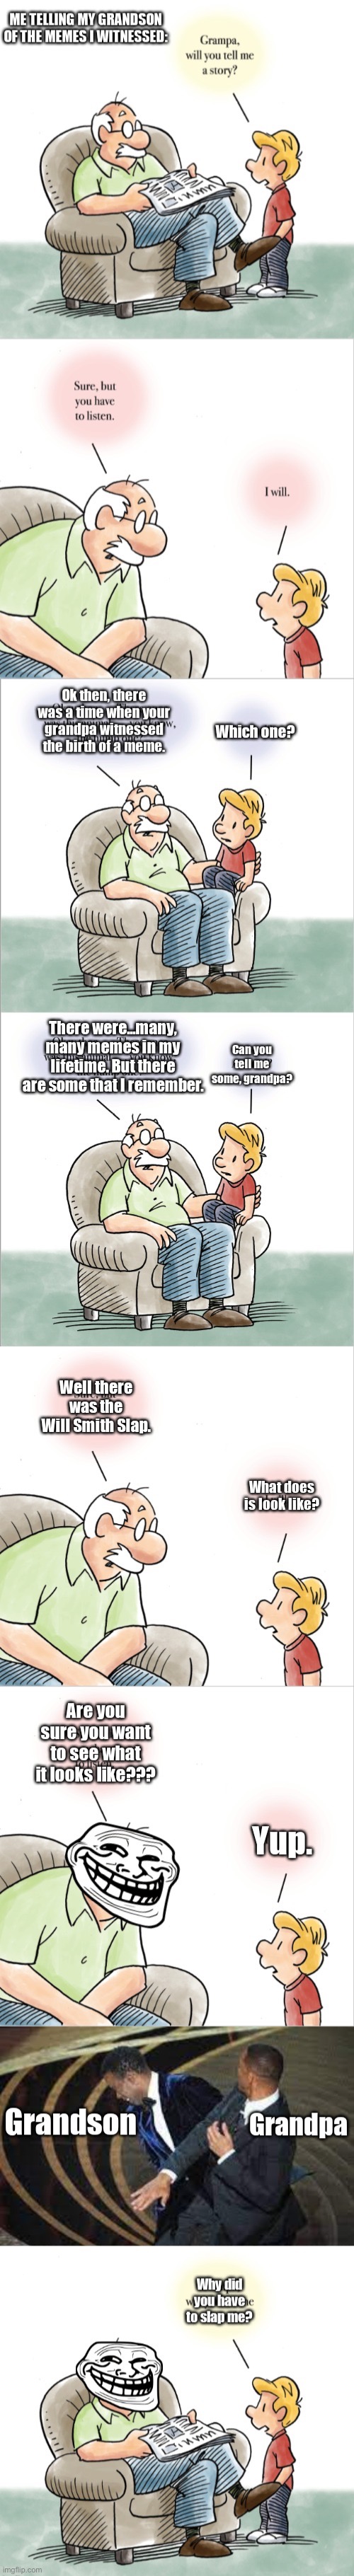 Me telling a strory to my grandson | image tagged in funny memes | made w/ Imgflip meme maker